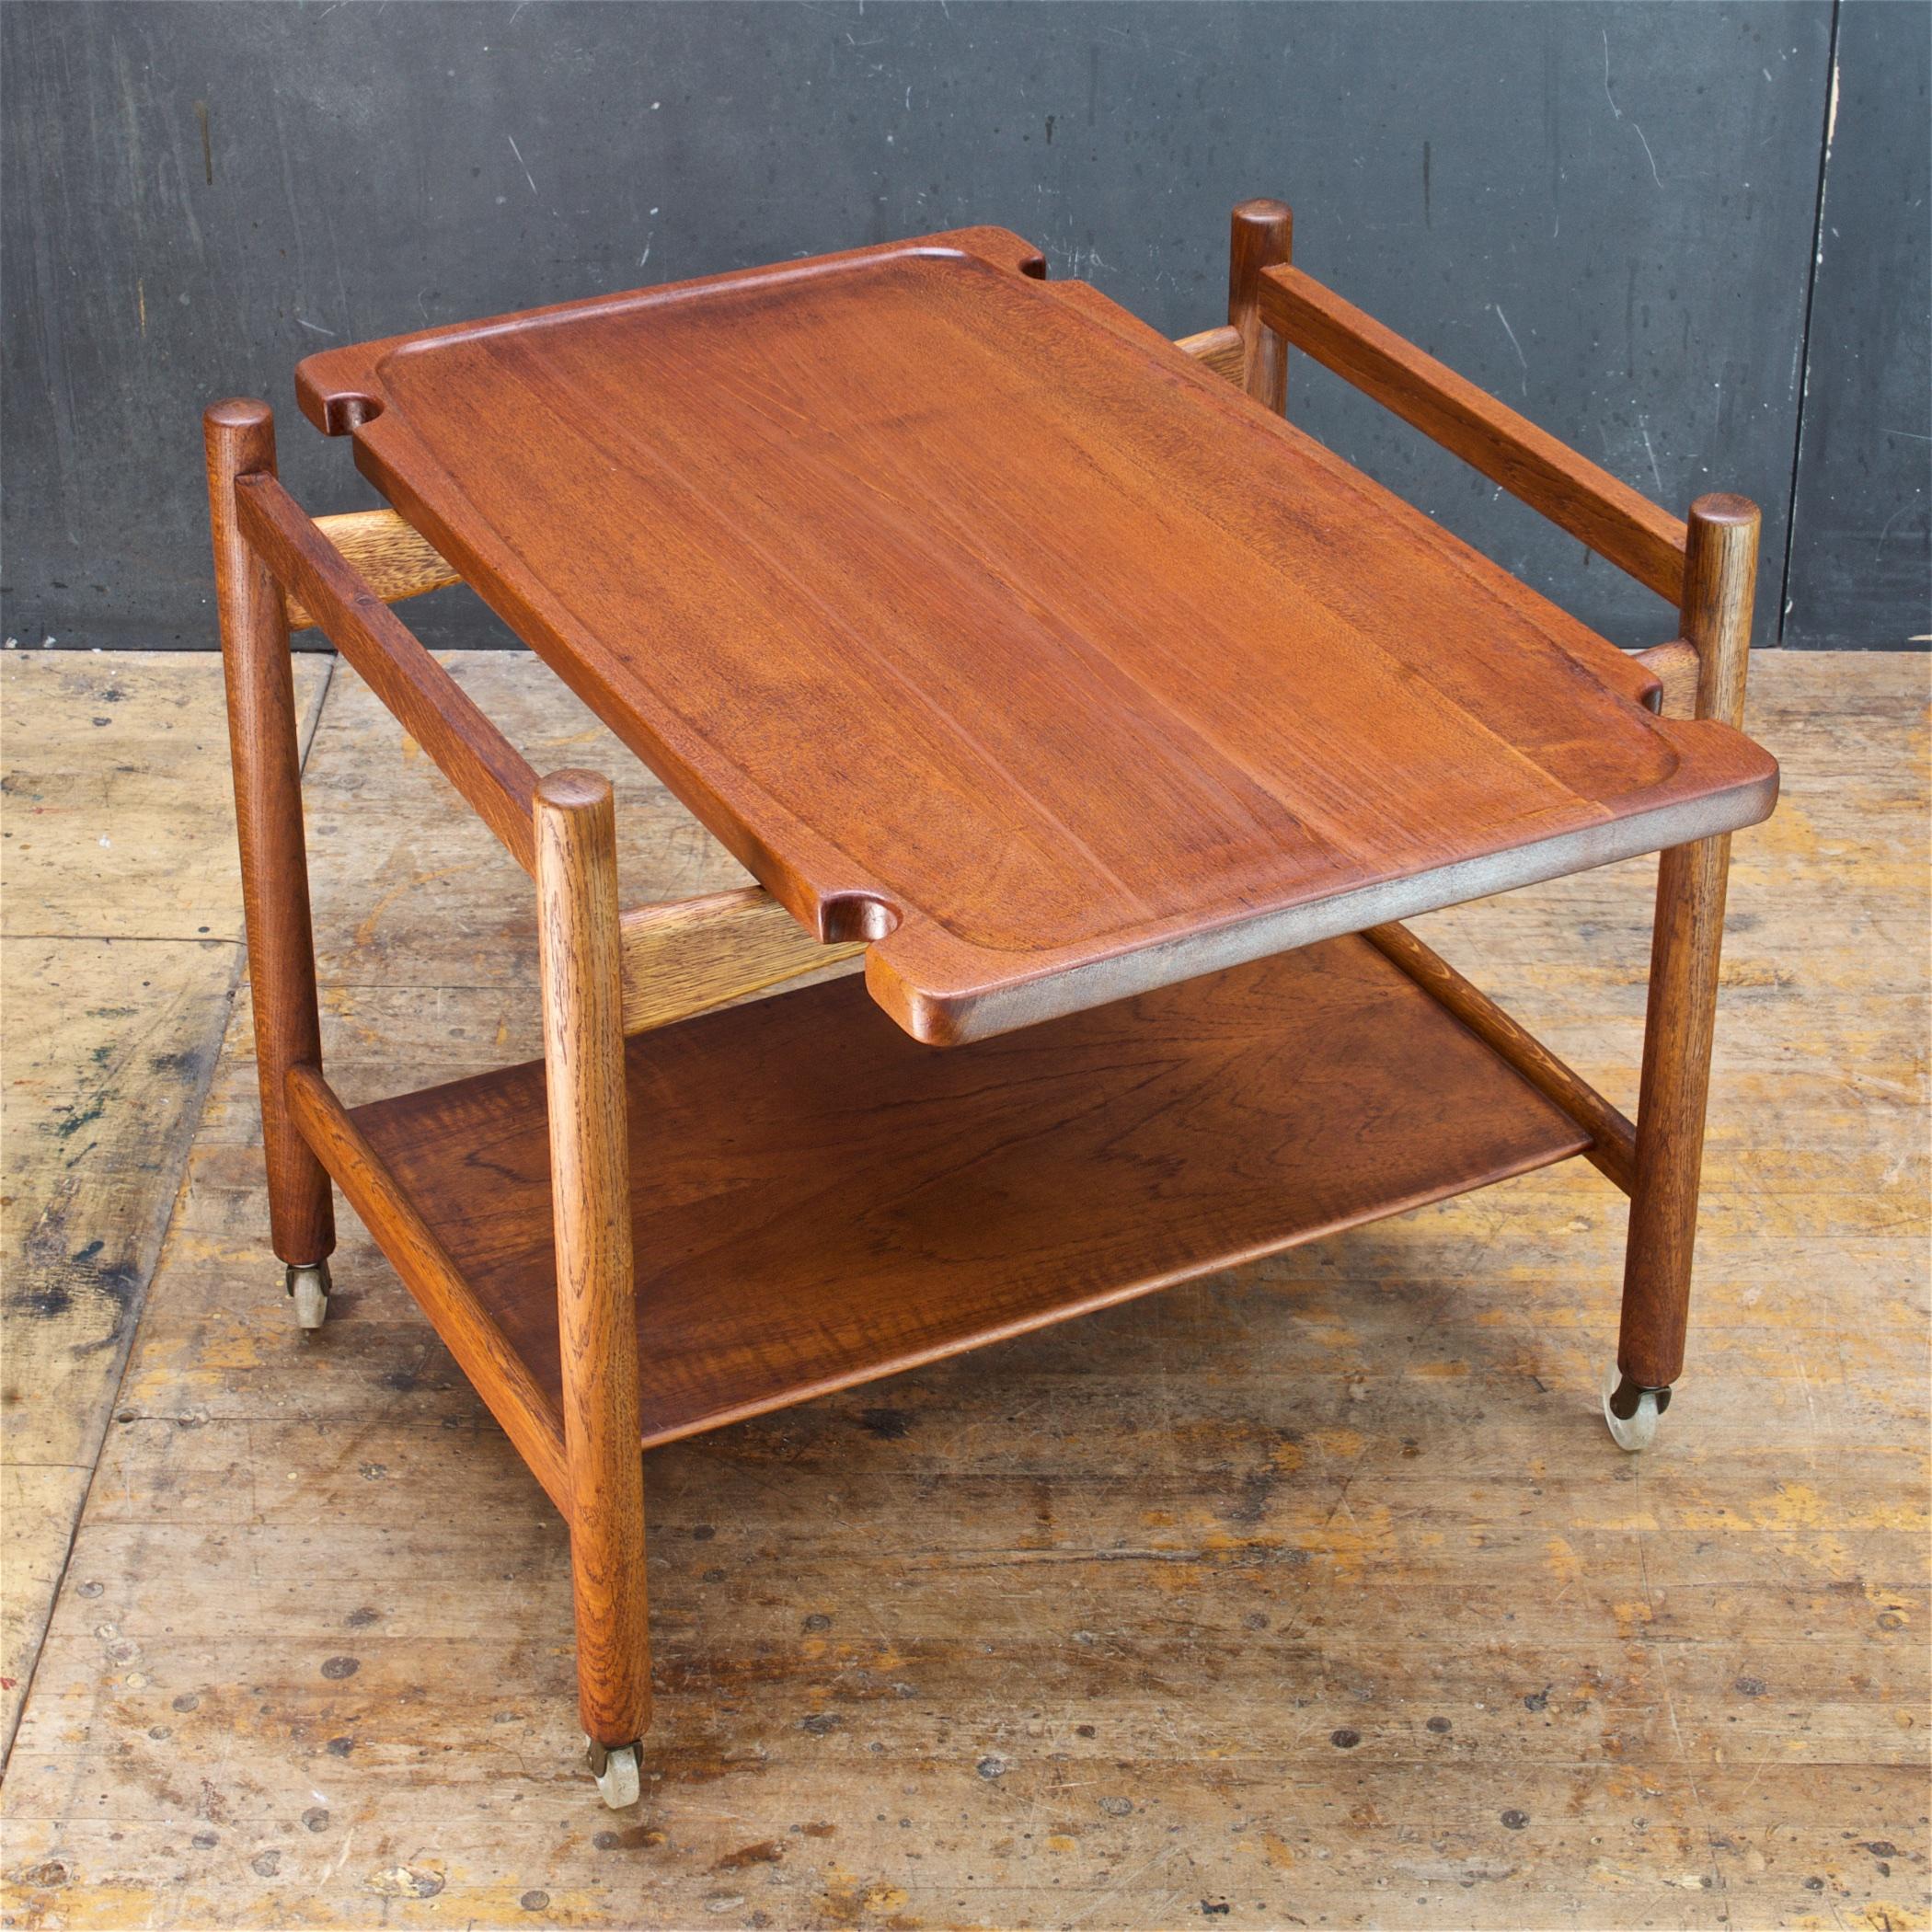 Hand-Crafted 1960s Hans Wegner Bar Cart Drink Trolly Serving Tray Danish Mid-Century Cabin For Sale